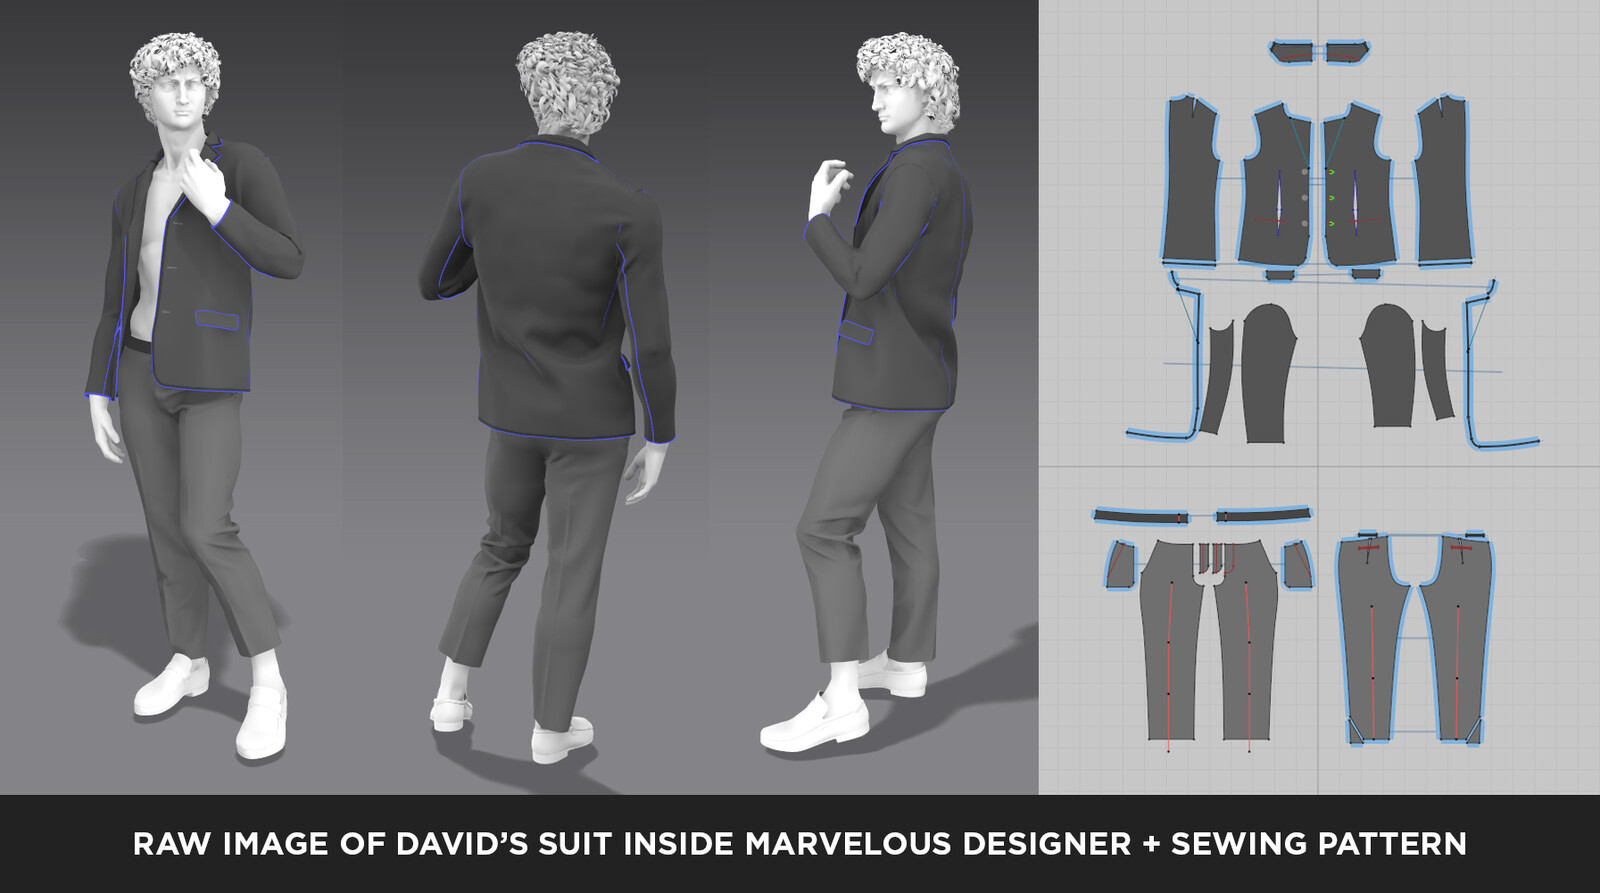 Marvelous Designer is my go-to solution for creating clothing. In this case a tweaked a template and added some additional designs to it. 